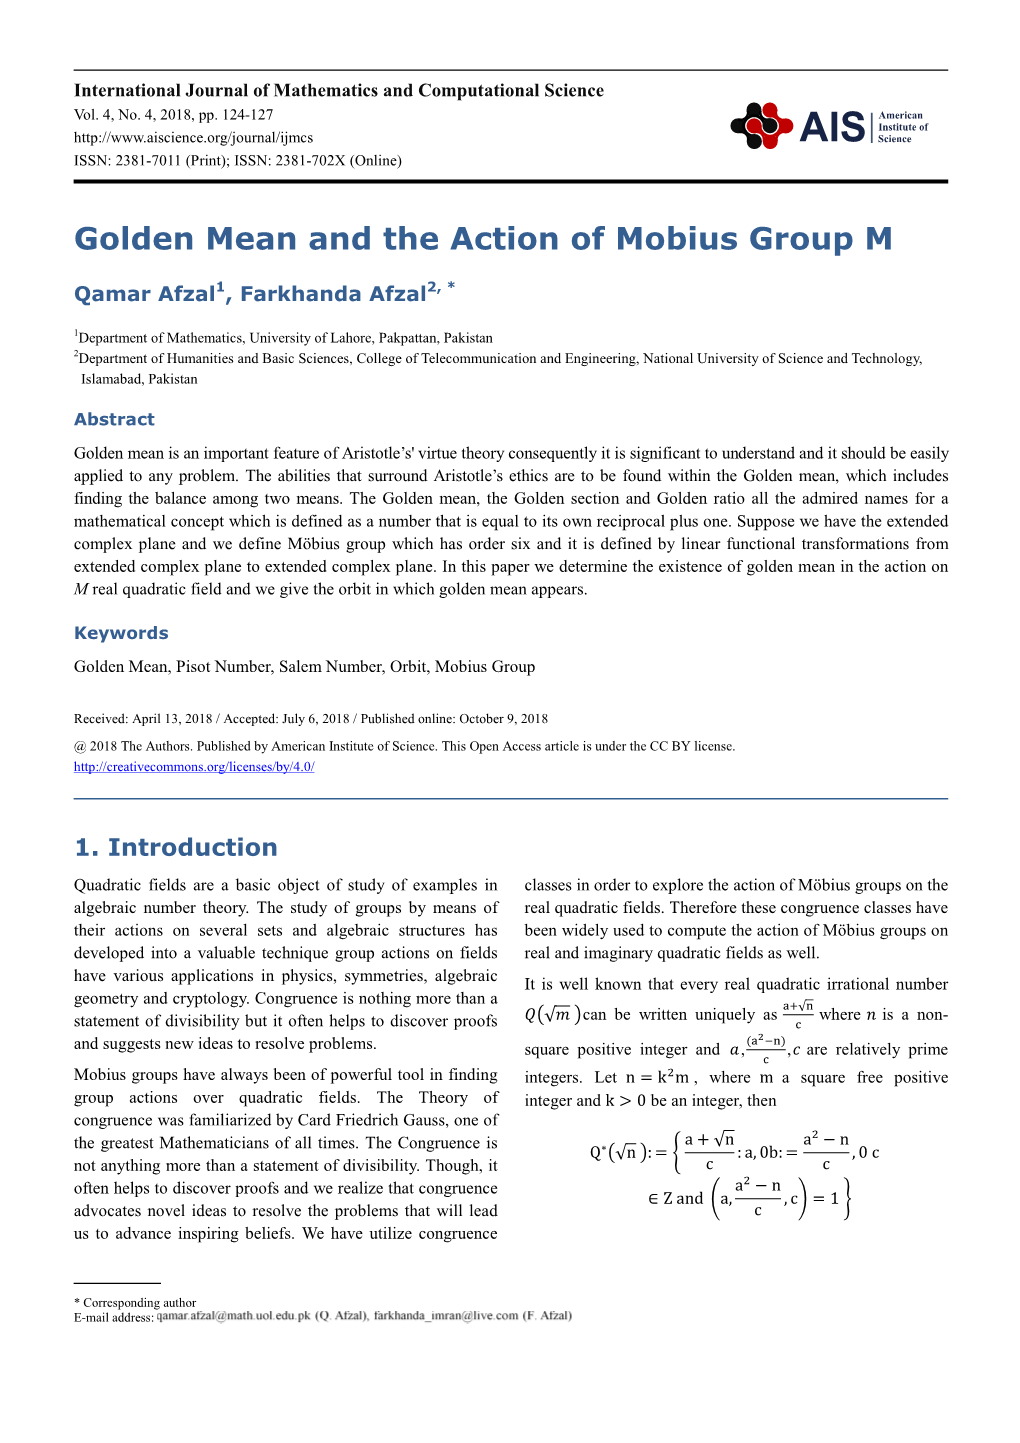 Golden Mean and the Action of Mobius Group M